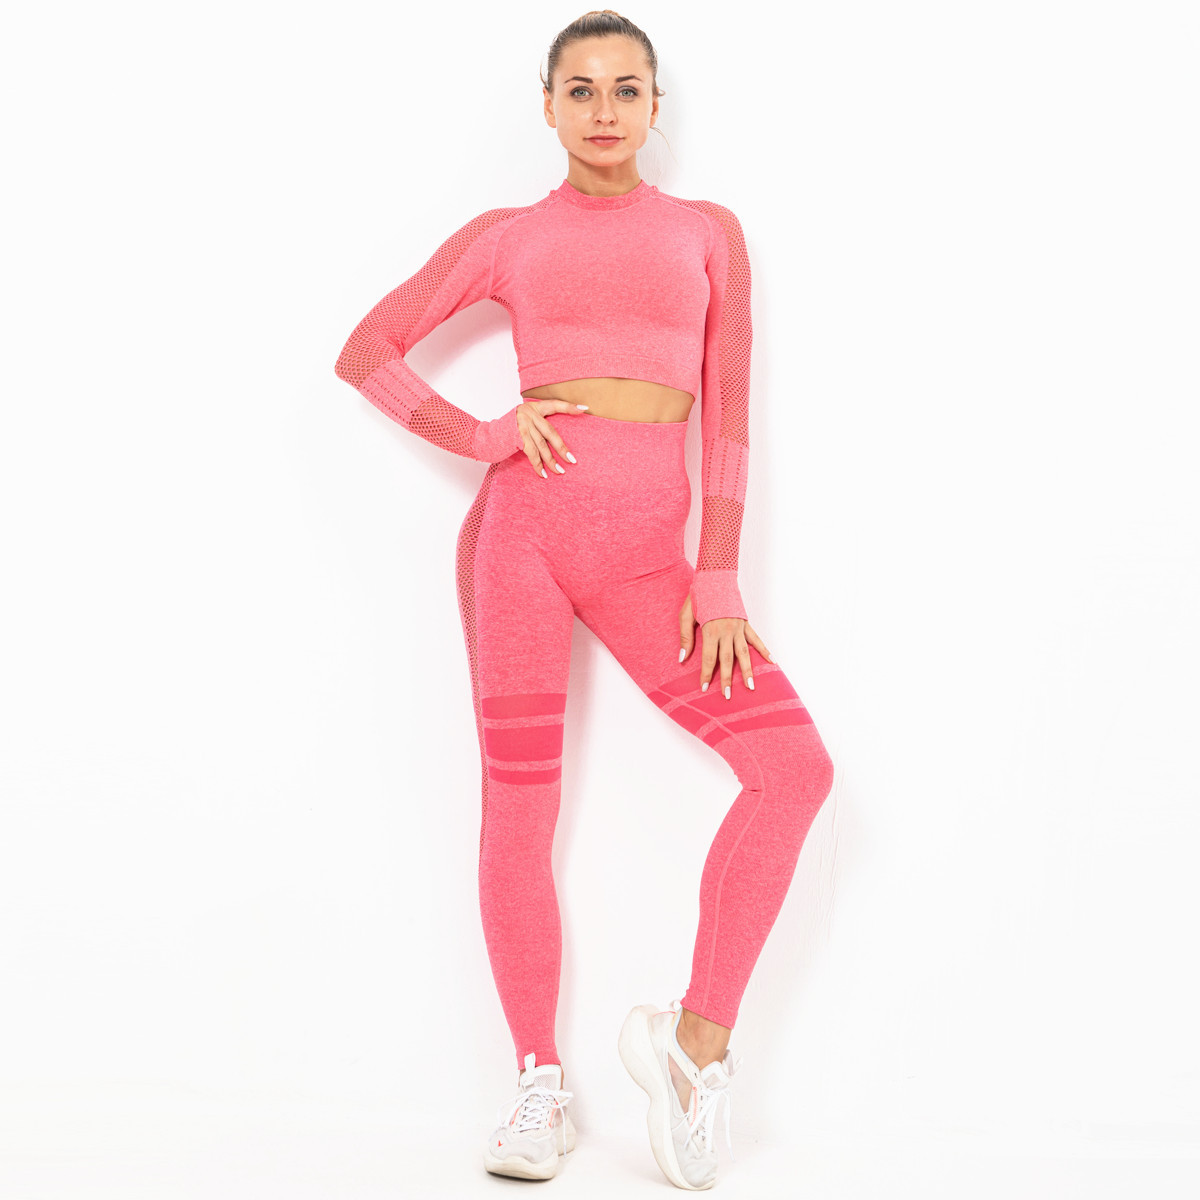 tight-fitting hip pants slim long-sleeved two-piece yoga suit NSLX8981